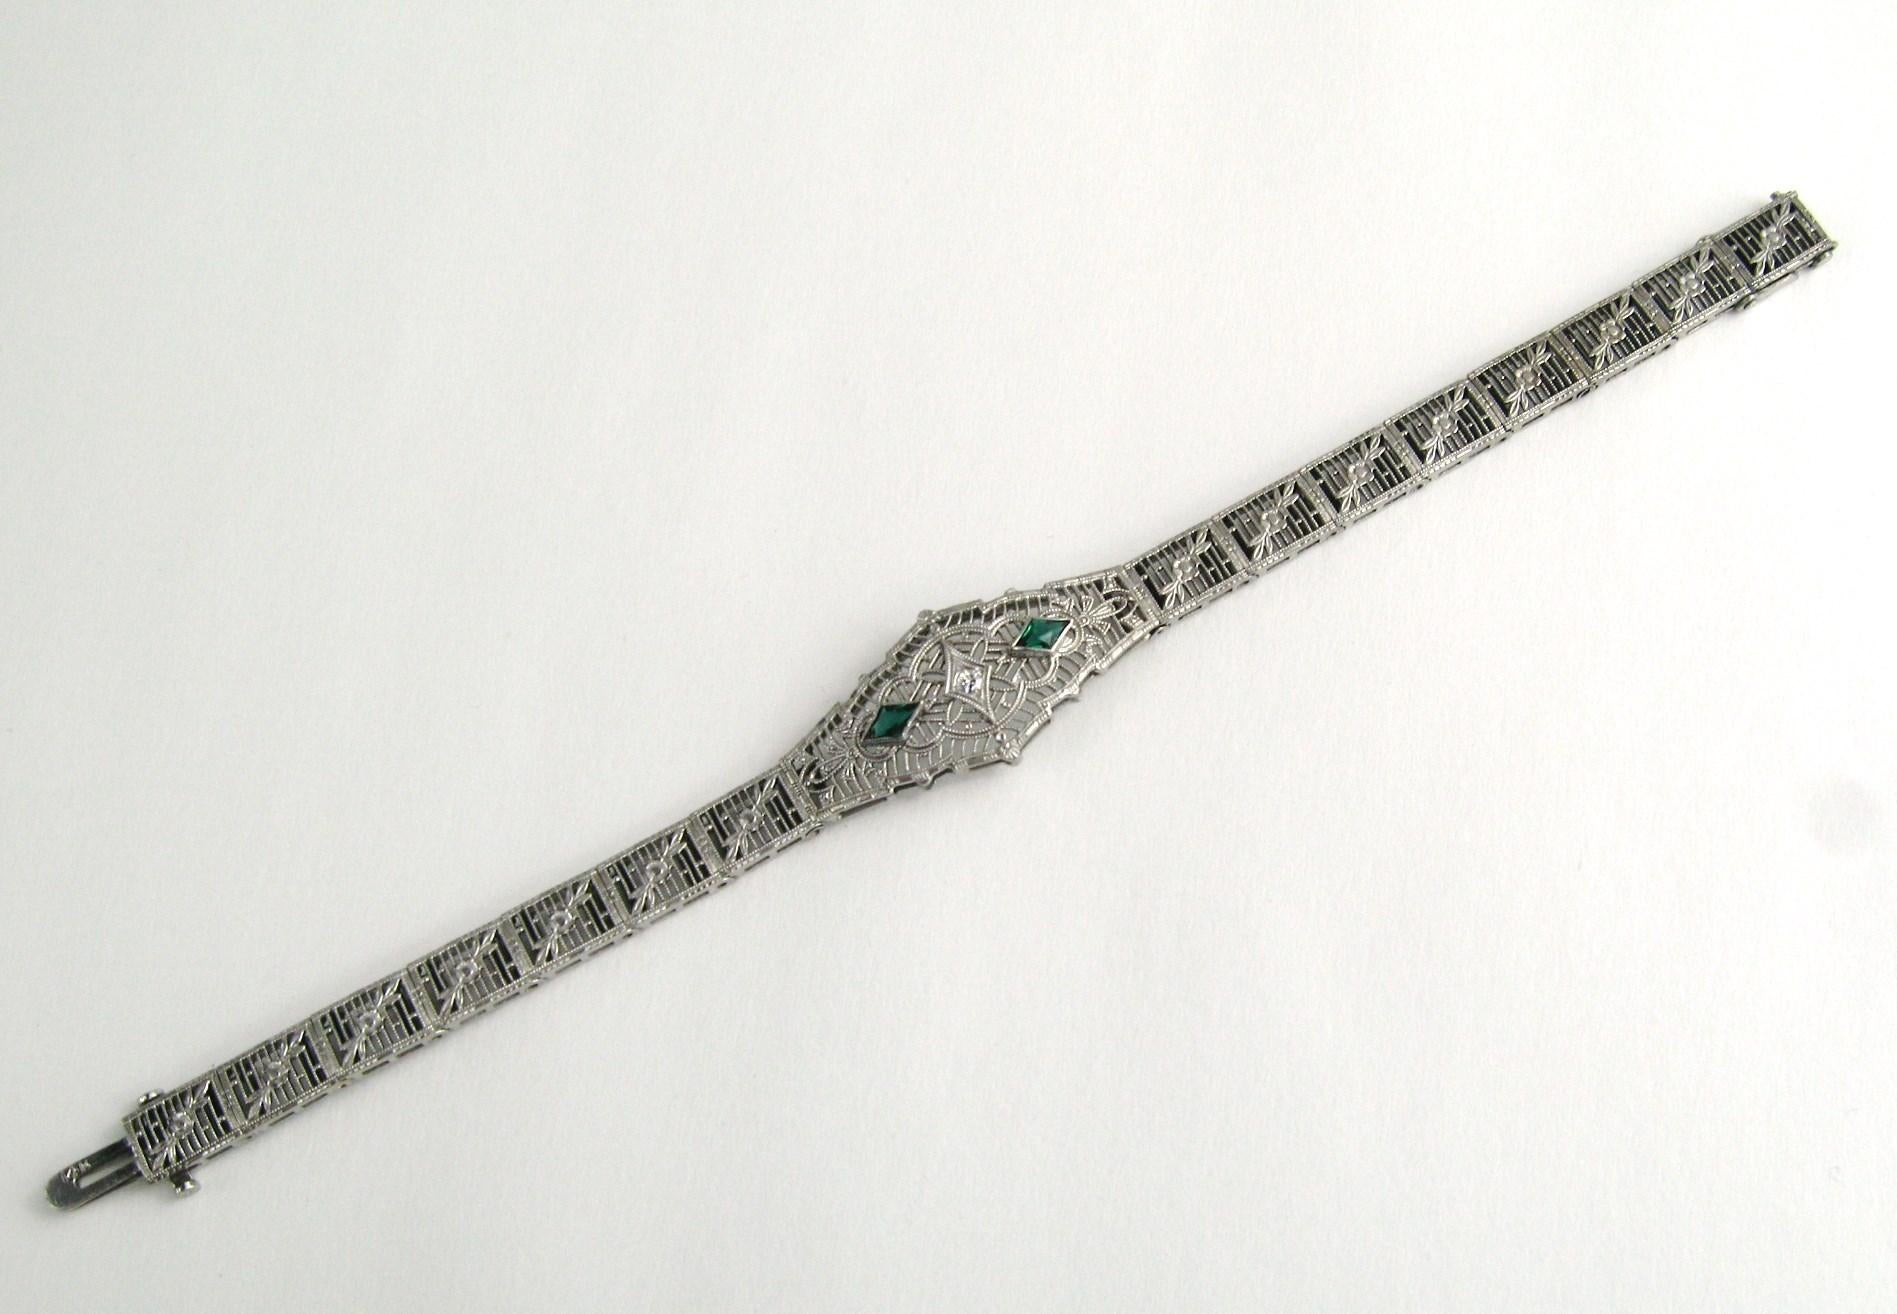 Stunning 1920s Art deco Bracelet, green glass stones with a diamond accent center. Set in 14K white gold. This measures .59